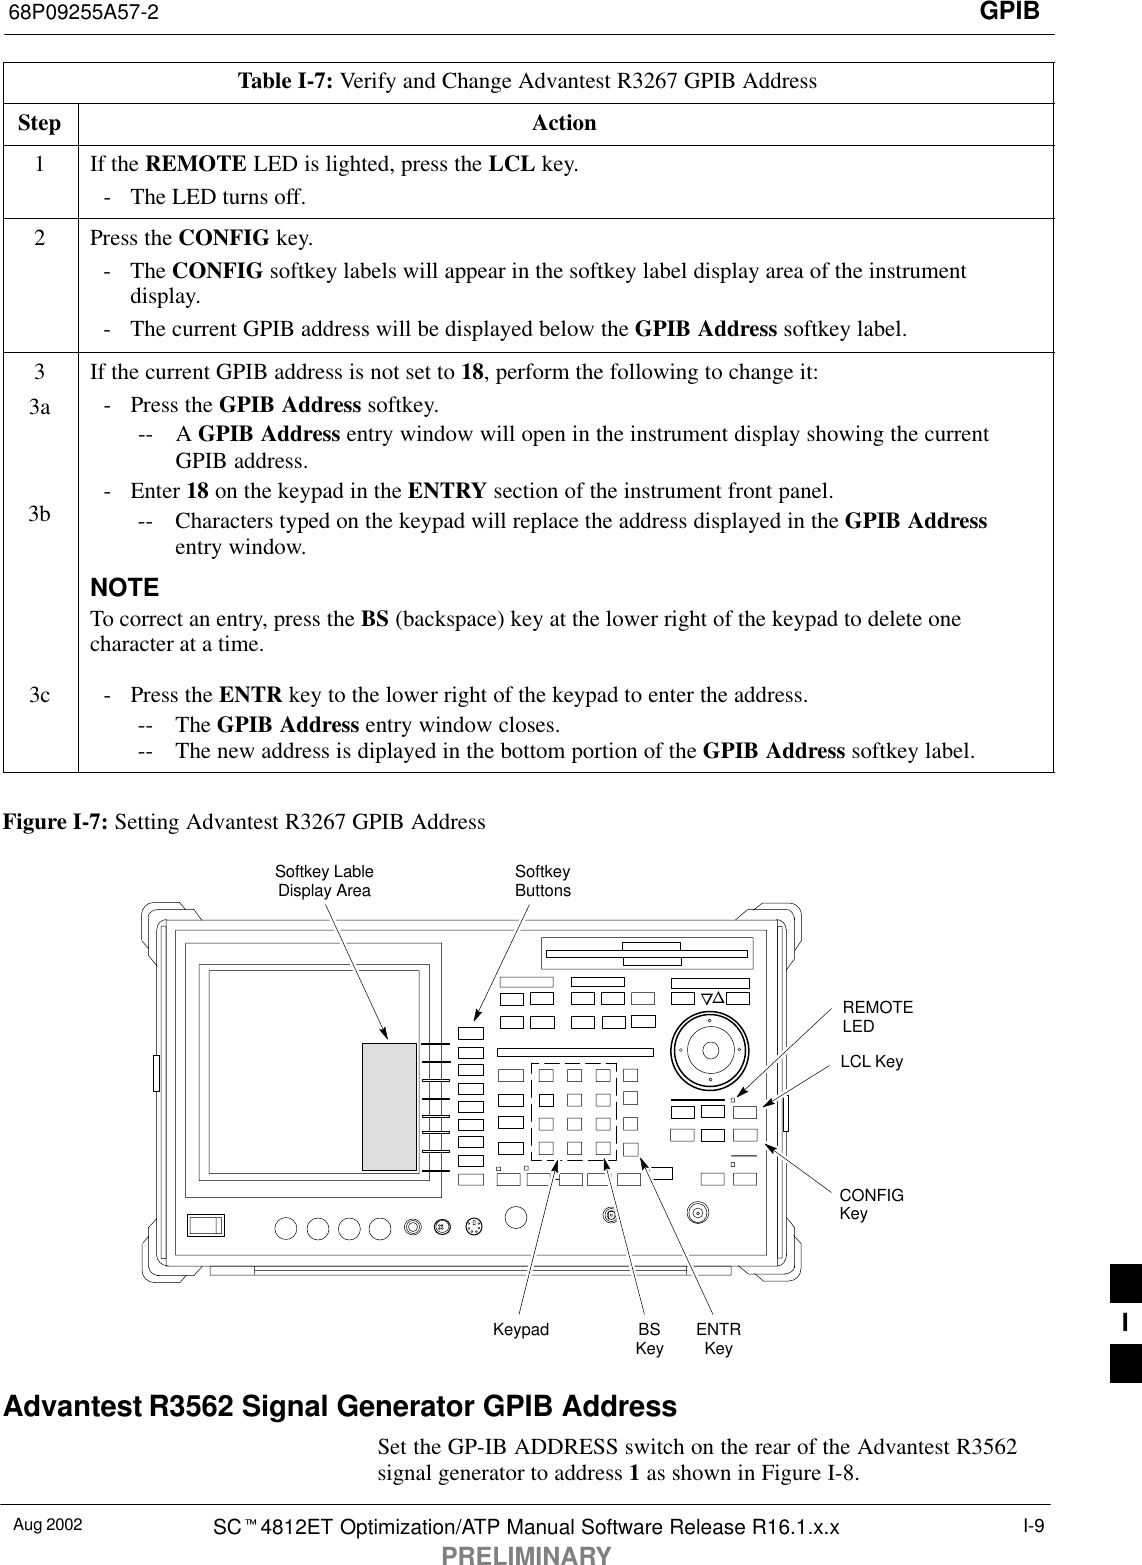 GPIB68P09255A57-2Aug 2002 SCt4812ET Optimization/ATP Manual Software Release R16.1.x.xPRELIMINARYI-9Table I-7: Verify and Change Advantest R3267 GPIB AddressStep Action1If the REMOTE LED is lighted, press the LCL key.- The LED turns off.2Press the CONFIG key.- The CONFIG softkey labels will appear in the softkey label display area of the instrumentdisplay.- The current GPIB address will be displayed below the GPIB Address softkey label.33aIf the current GPIB address is not set to 18, perform the following to change it:- Press the GPIB Address softkey.-- A GPIB Address entry window will open in the instrument display showing the currentGPIB address.3b - Enter 18 on the keypad in the ENTRY section of the instrument front panel.-- Characters typed on the keypad will replace the address displayed in the GPIB Addressentry window.NOTETo correct an entry, press the BS (backspace) key at the lower right of the keypad to delete onecharacter at a time.3c - Press the ENTR key to the lower right of the keypad to enter the address.-- The GPIB Address entry window closes.-- The new address is diplayed in the bottom portion of the GPIB Address softkey label. Figure I-7: Setting Advantest R3267 GPIB AddressonREMOTELEDLCL KeyCONFIGKeySoftkey LableDisplay Area SoftkeyButtonsKeypad BSKey ENTRKeyAdvantest R3562 Signal Generator GPIB AddressSet the GP-IB ADDRESS switch on the rear of the Advantest R3562signal generator to address 1 as shown in Figure I-8.I